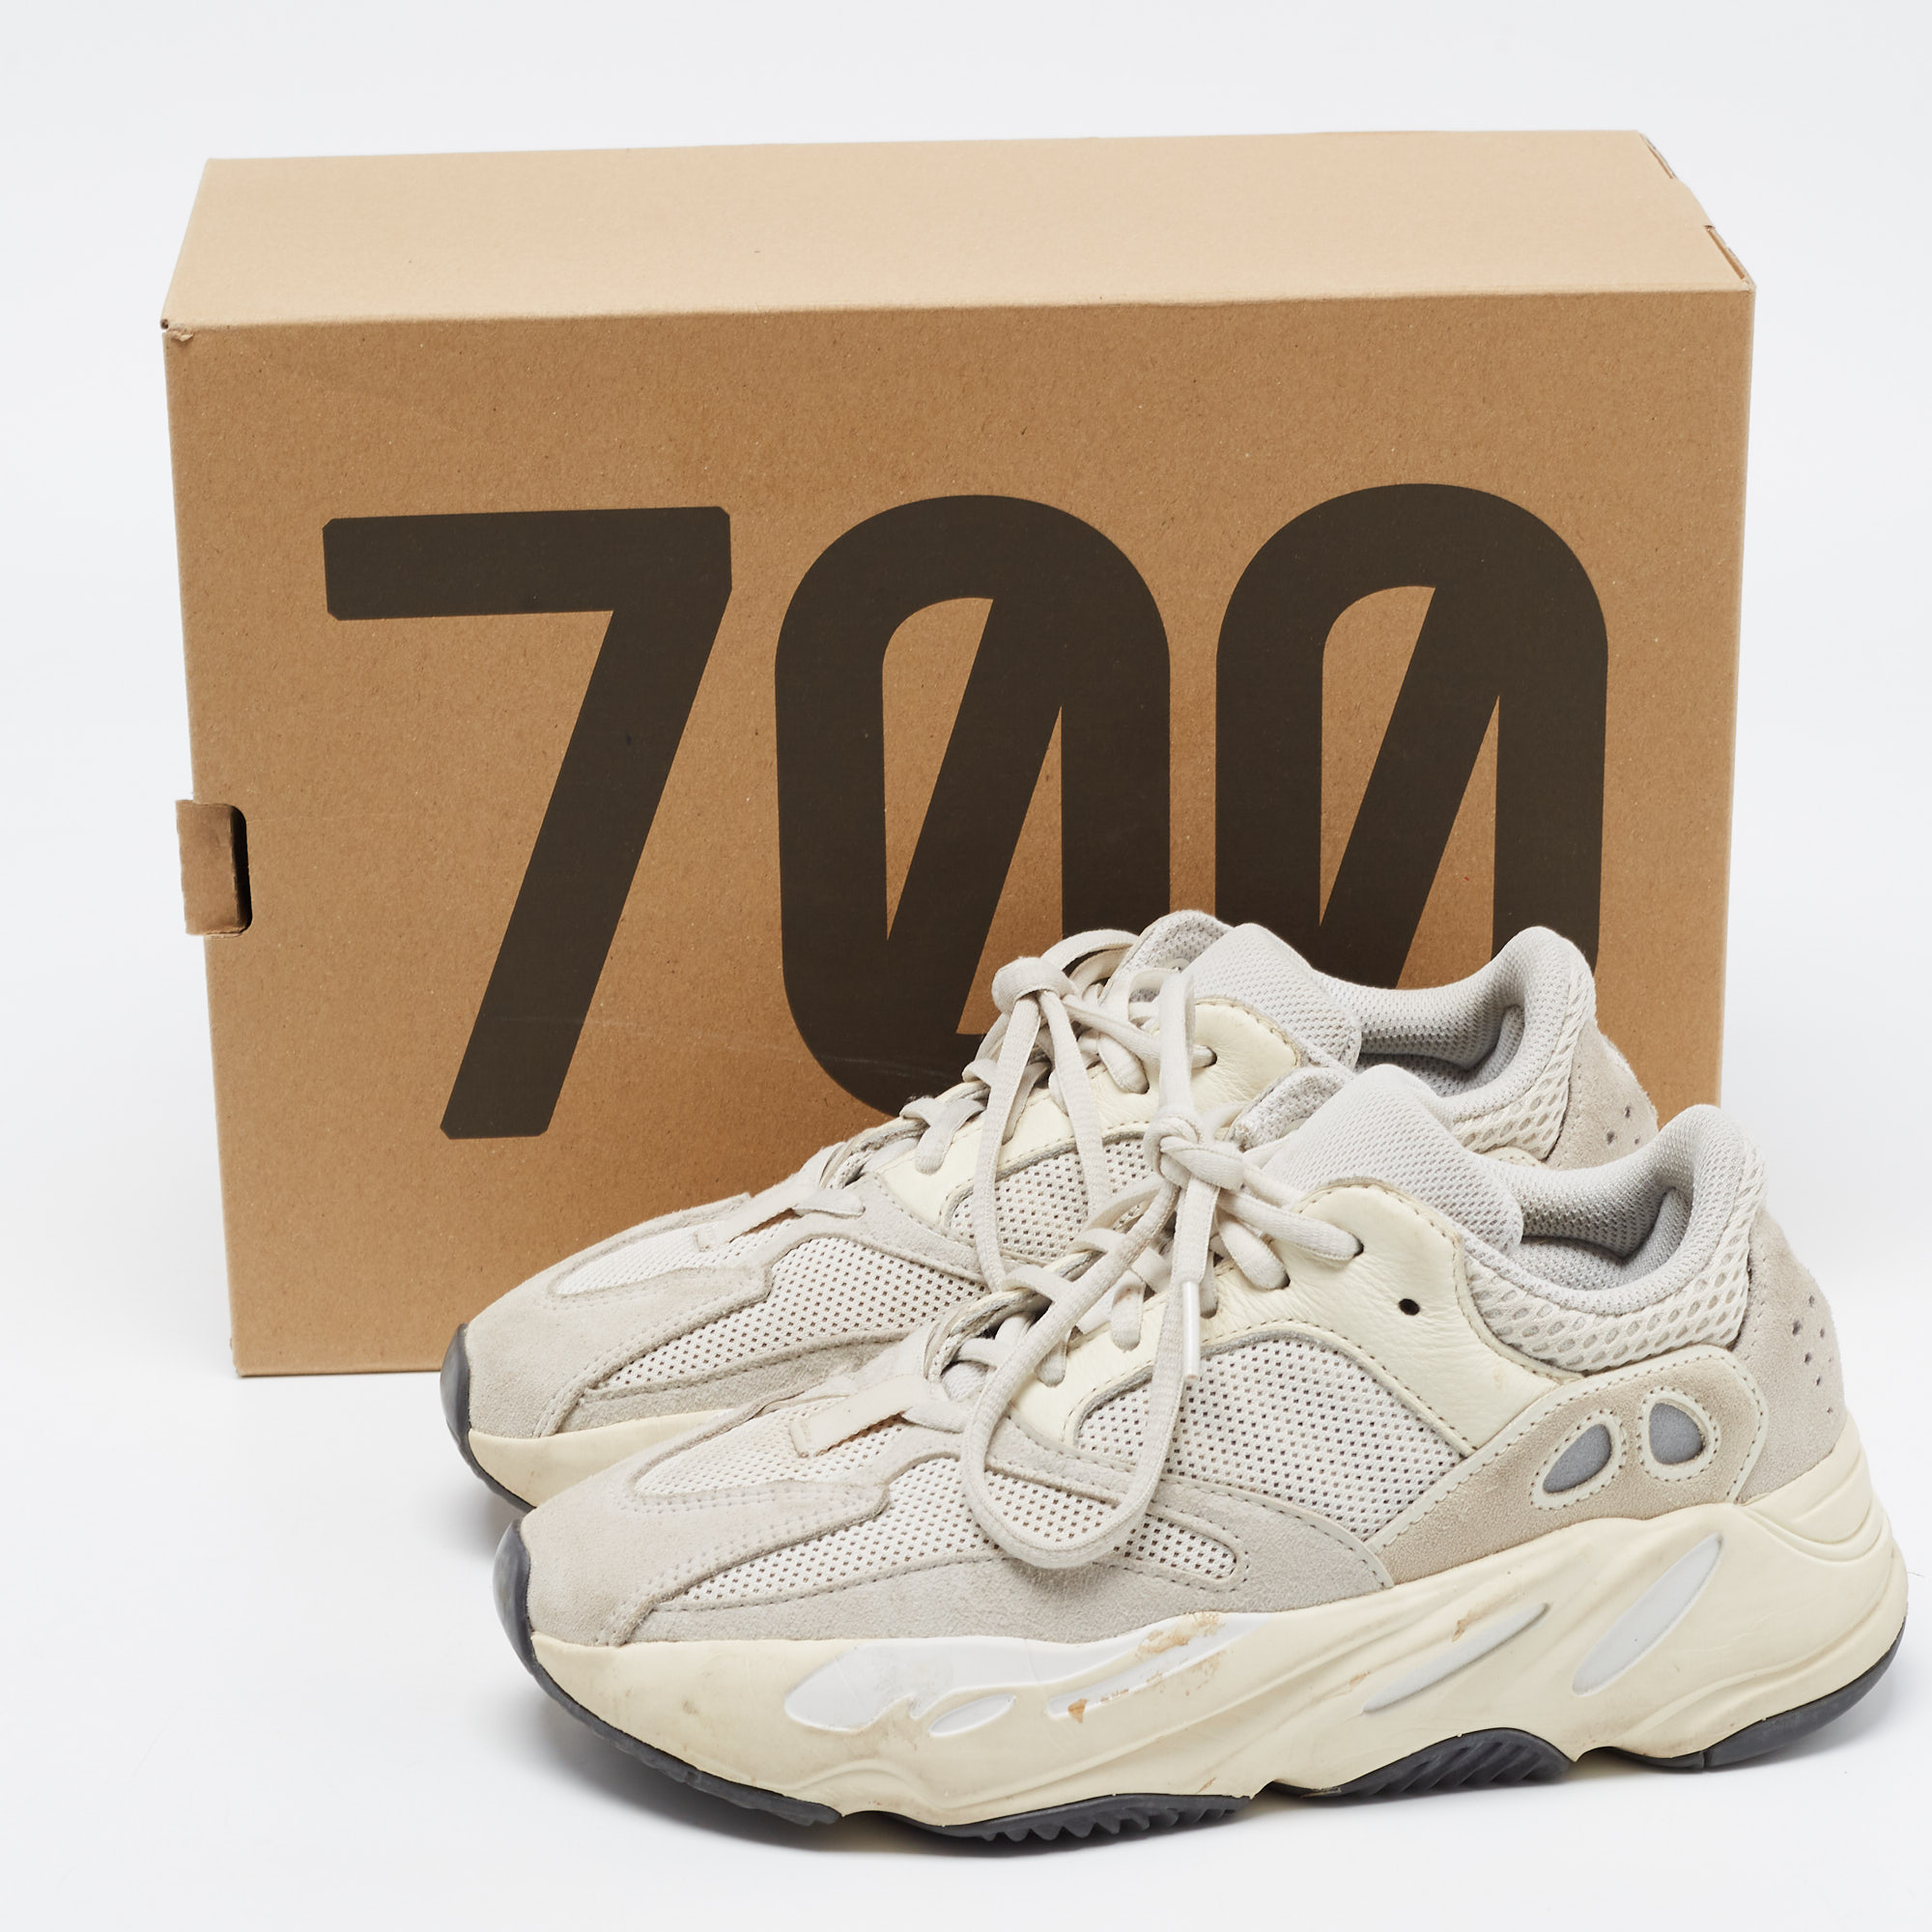 Yeezy X Adidas Cream Suede And Mesh Boost 700 Analog Sneakers Size 38